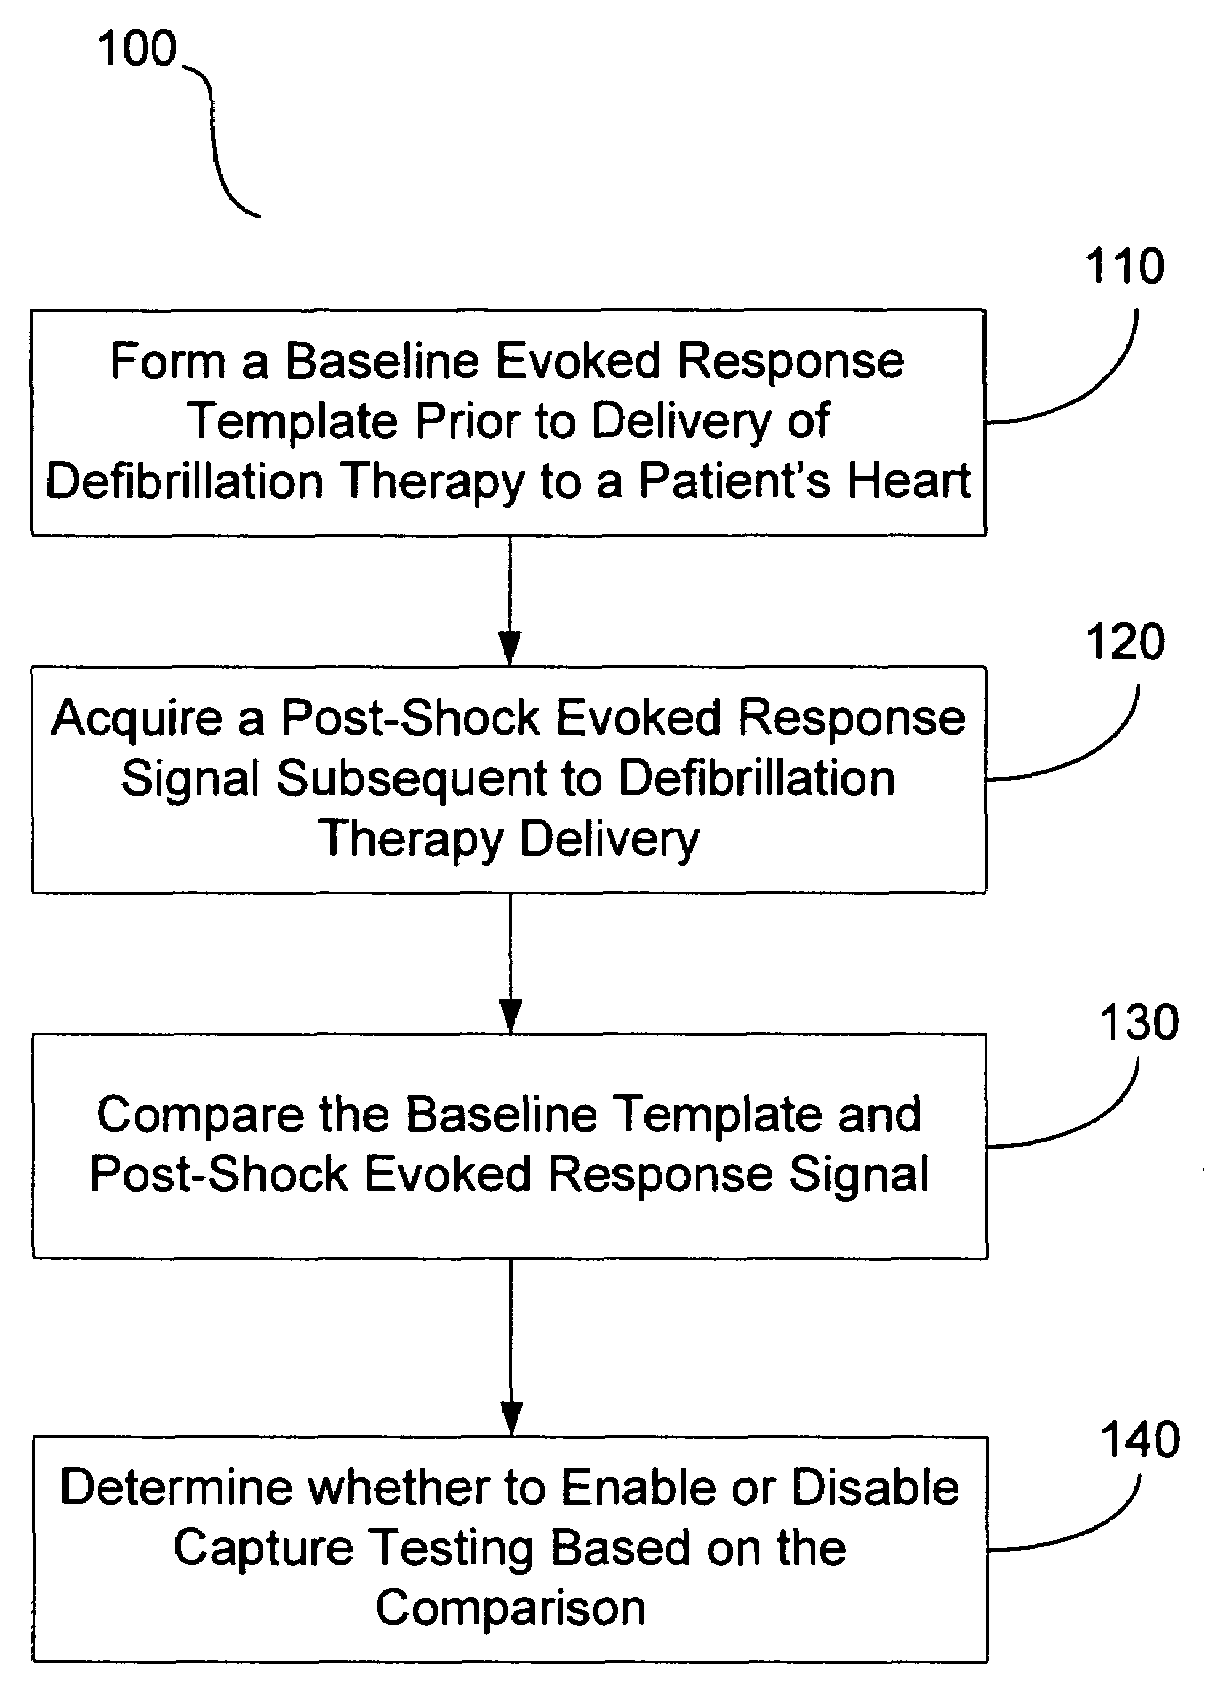 Post-shock management of implantable cardiac device features